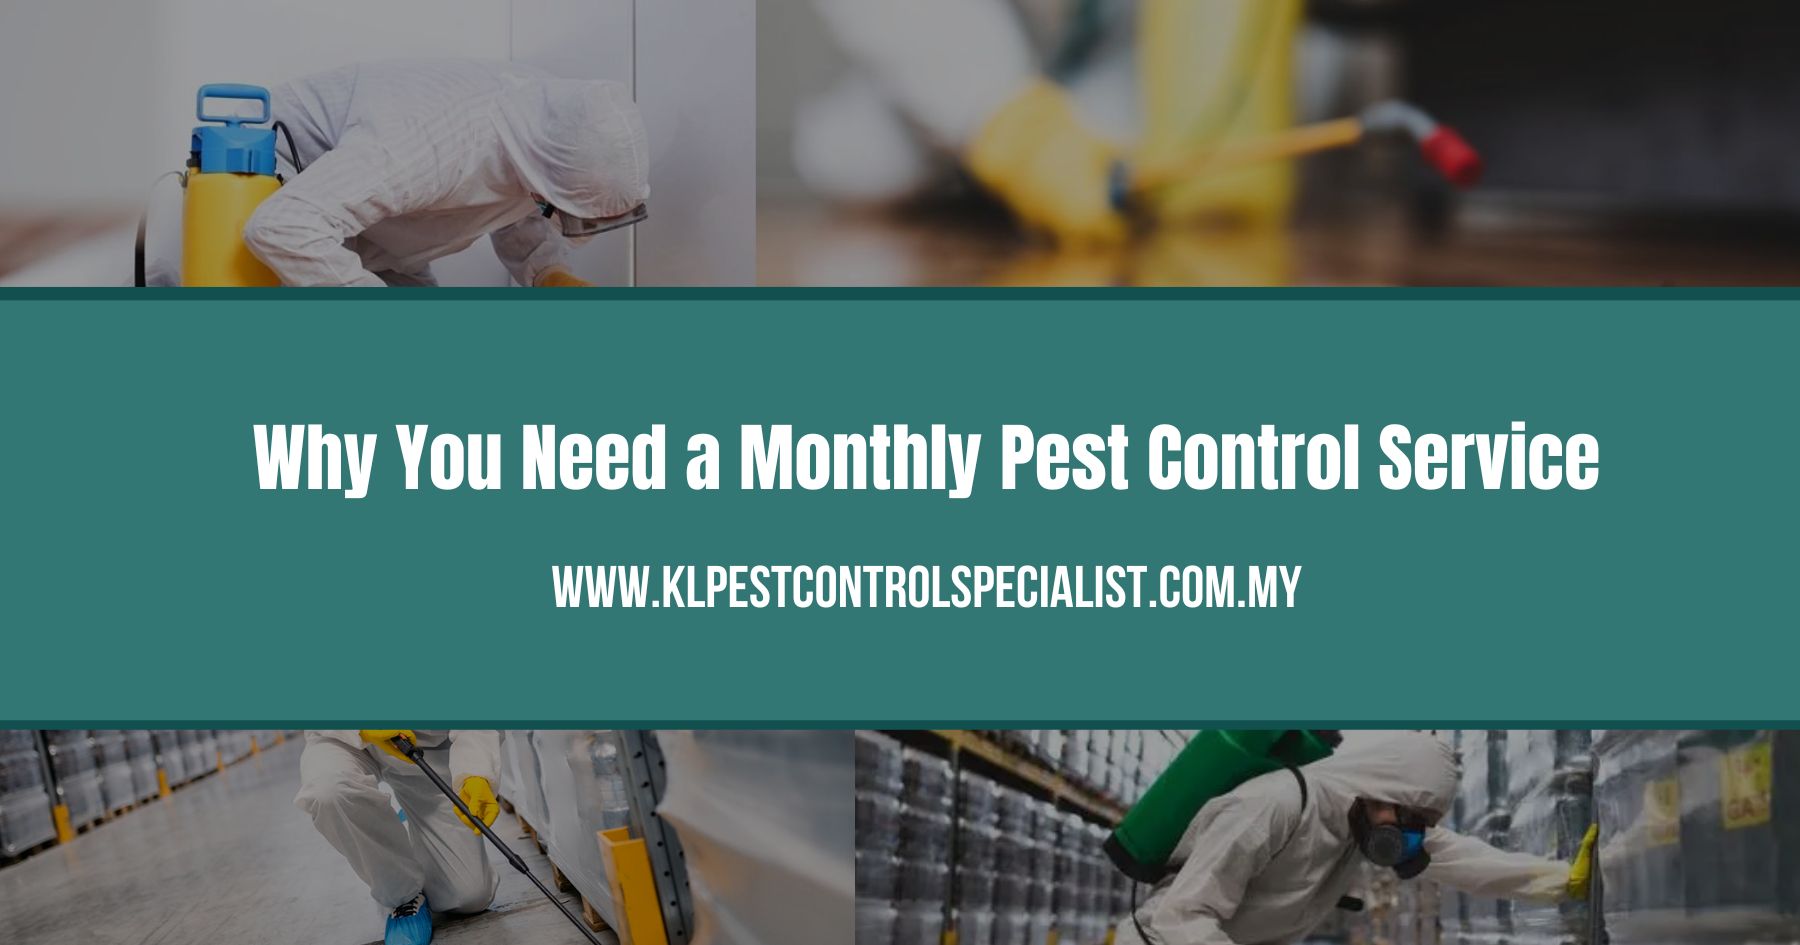 Why You Need a Monthly Pest Control Service